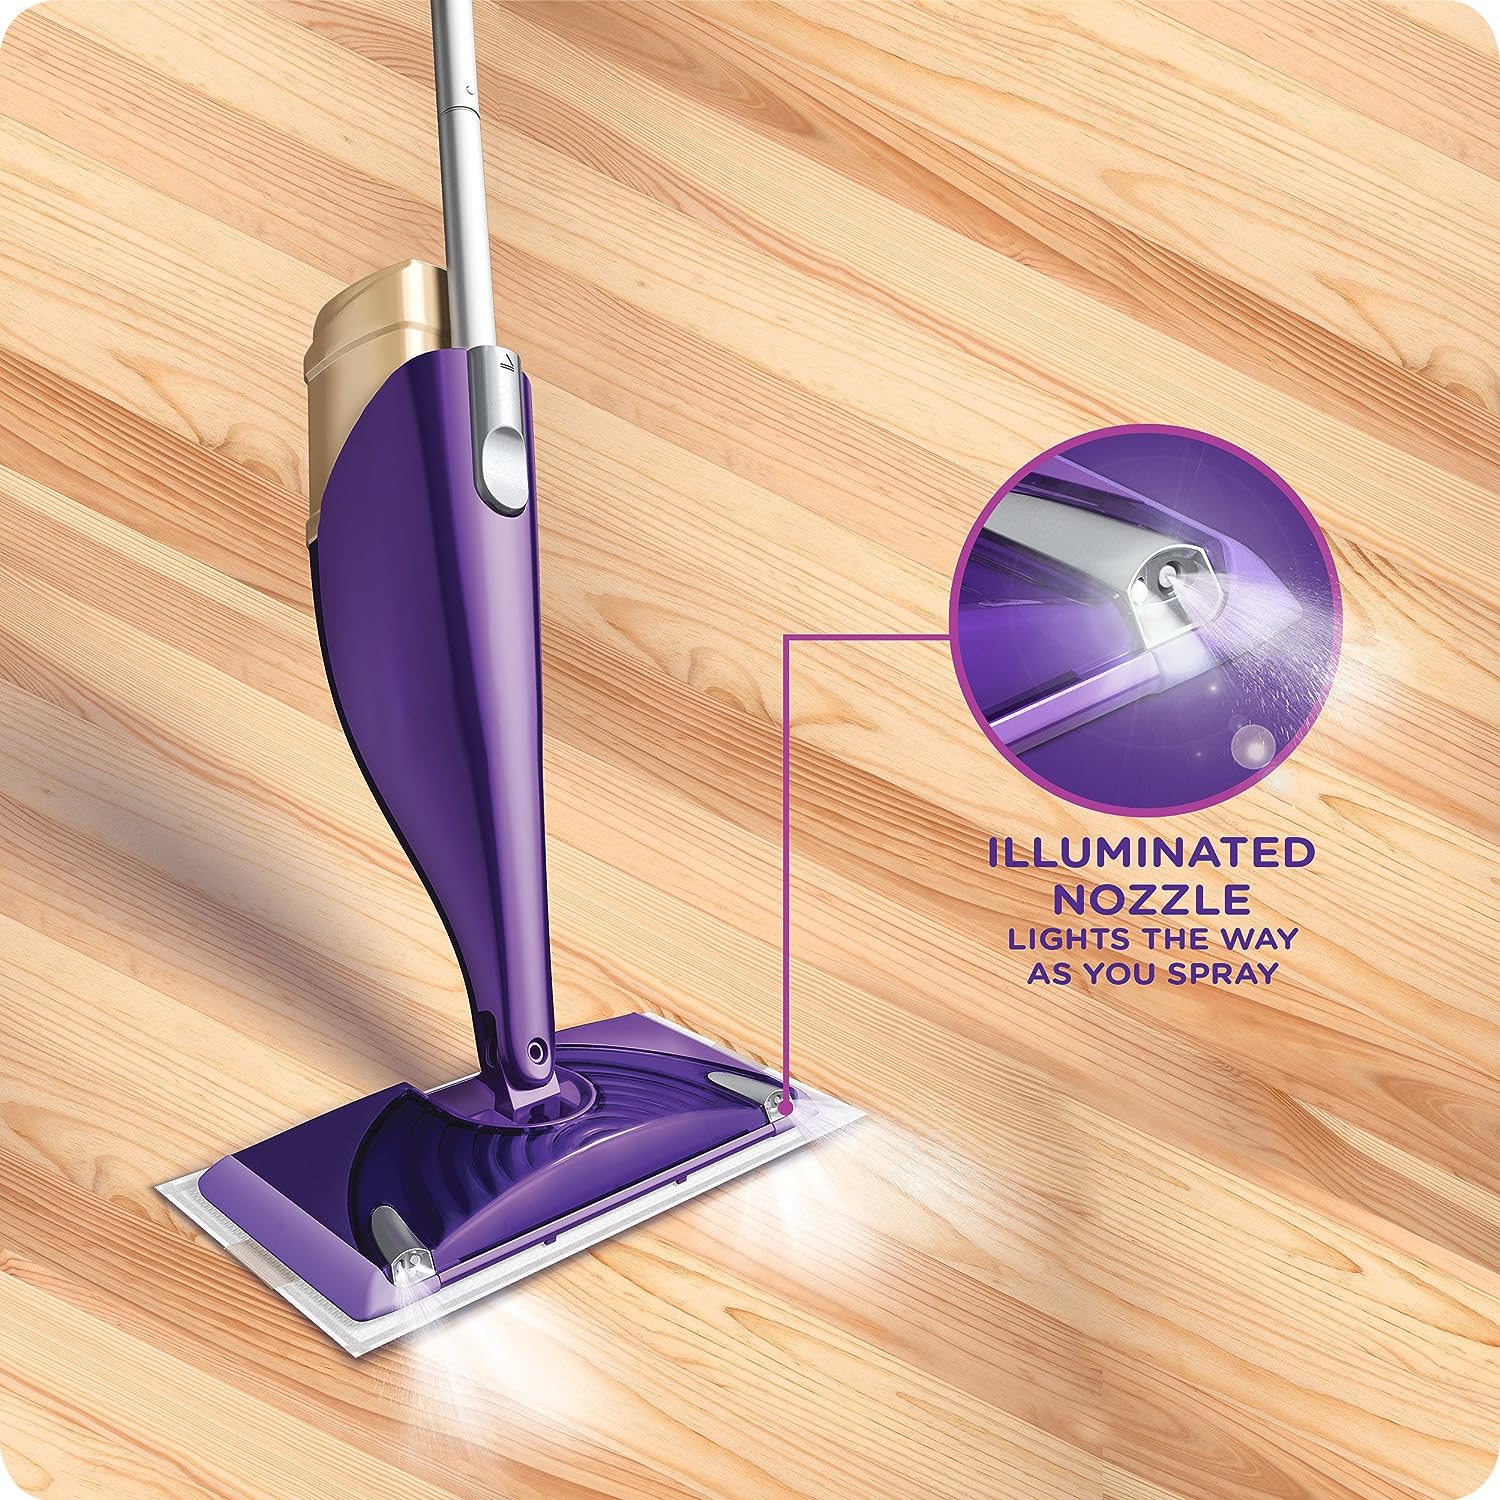 Swiffer WetJet Wood Floor Mopping and Cleaning Starter Kit, All Purpose Floor Cleaning Products, 1 Mop, 10 Pads, Cleaning Solution, Batteries : Health & Household